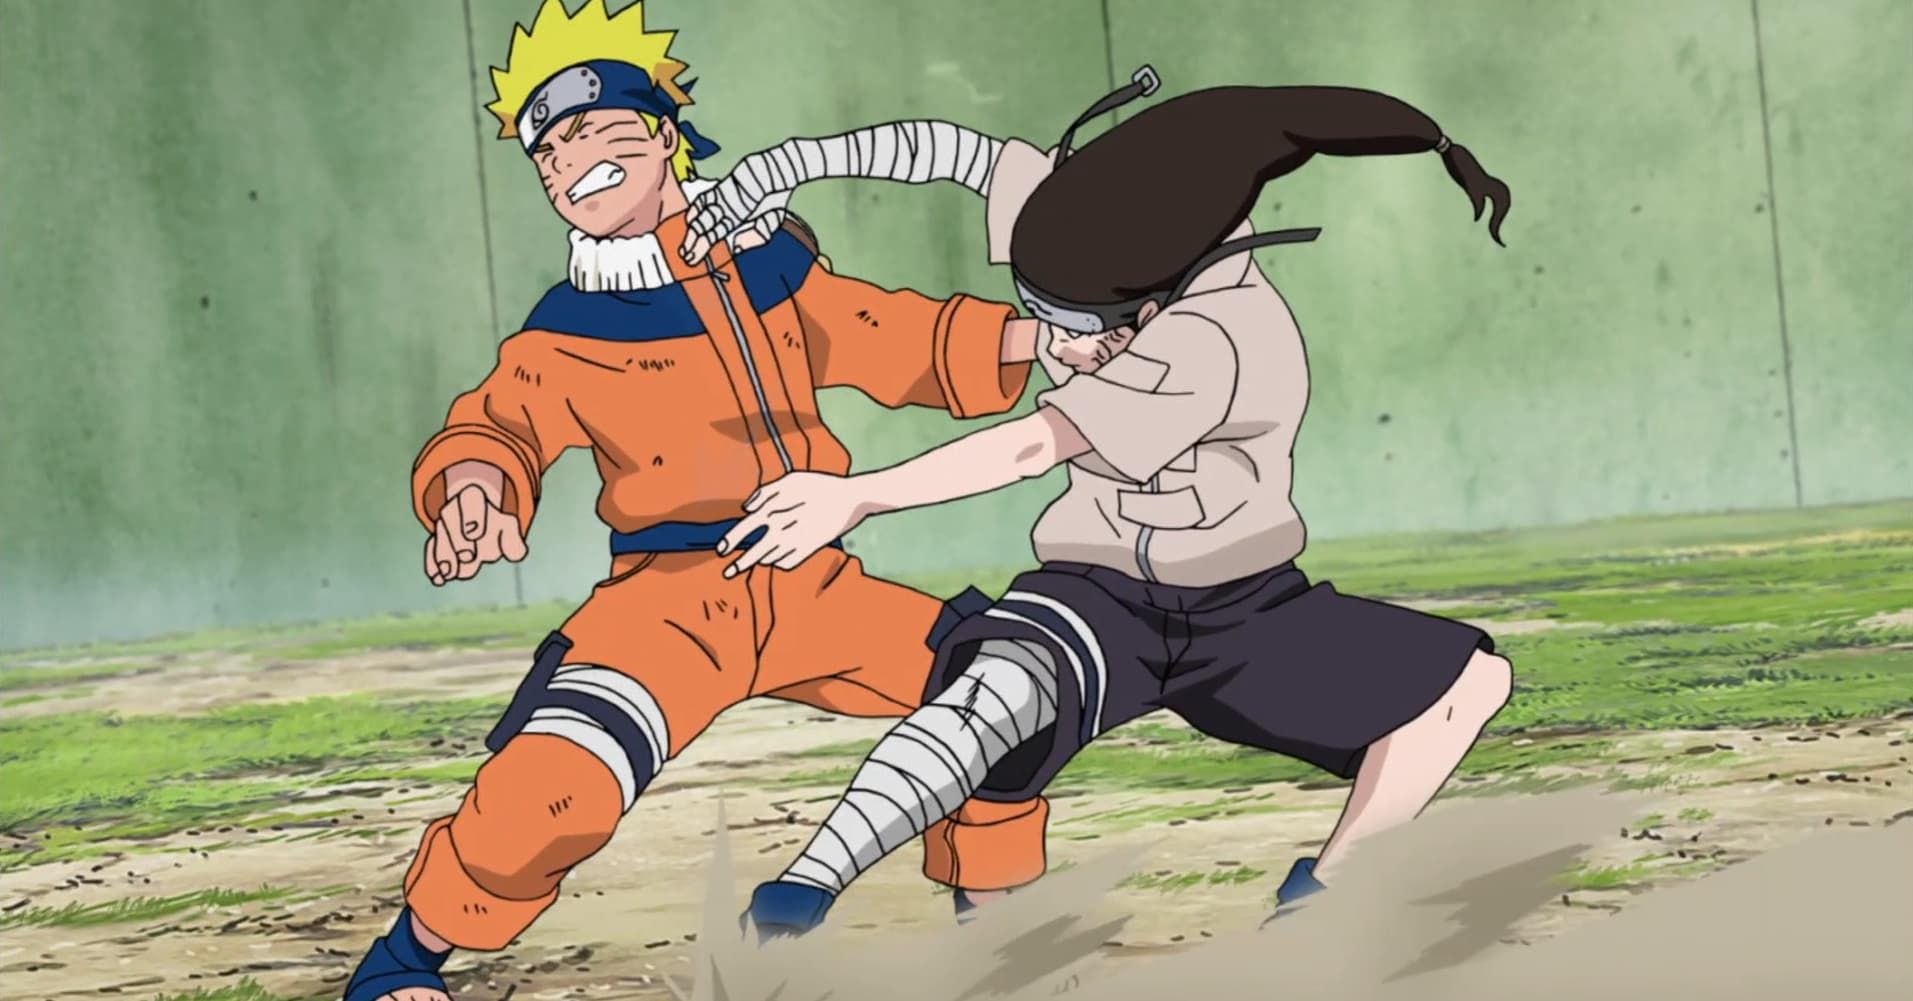 Neji gets defeated by Naruto